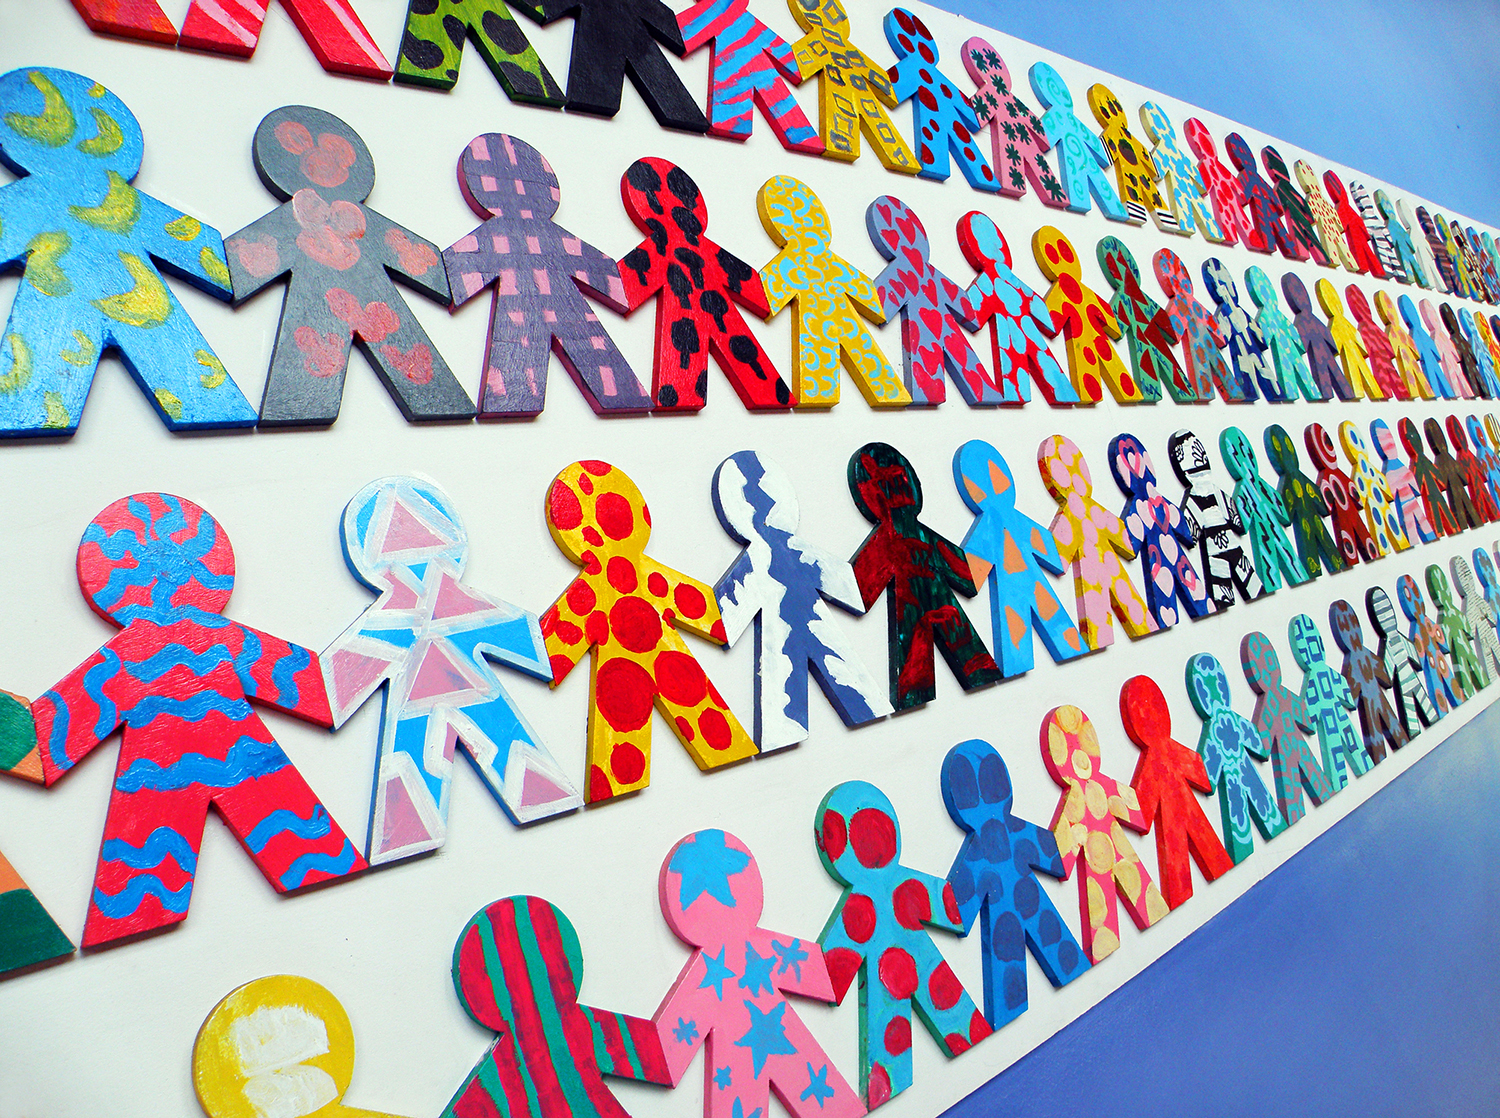 Multi-colored cutouts of children holding hands, symbolizing the diversity and unity of the world's people.